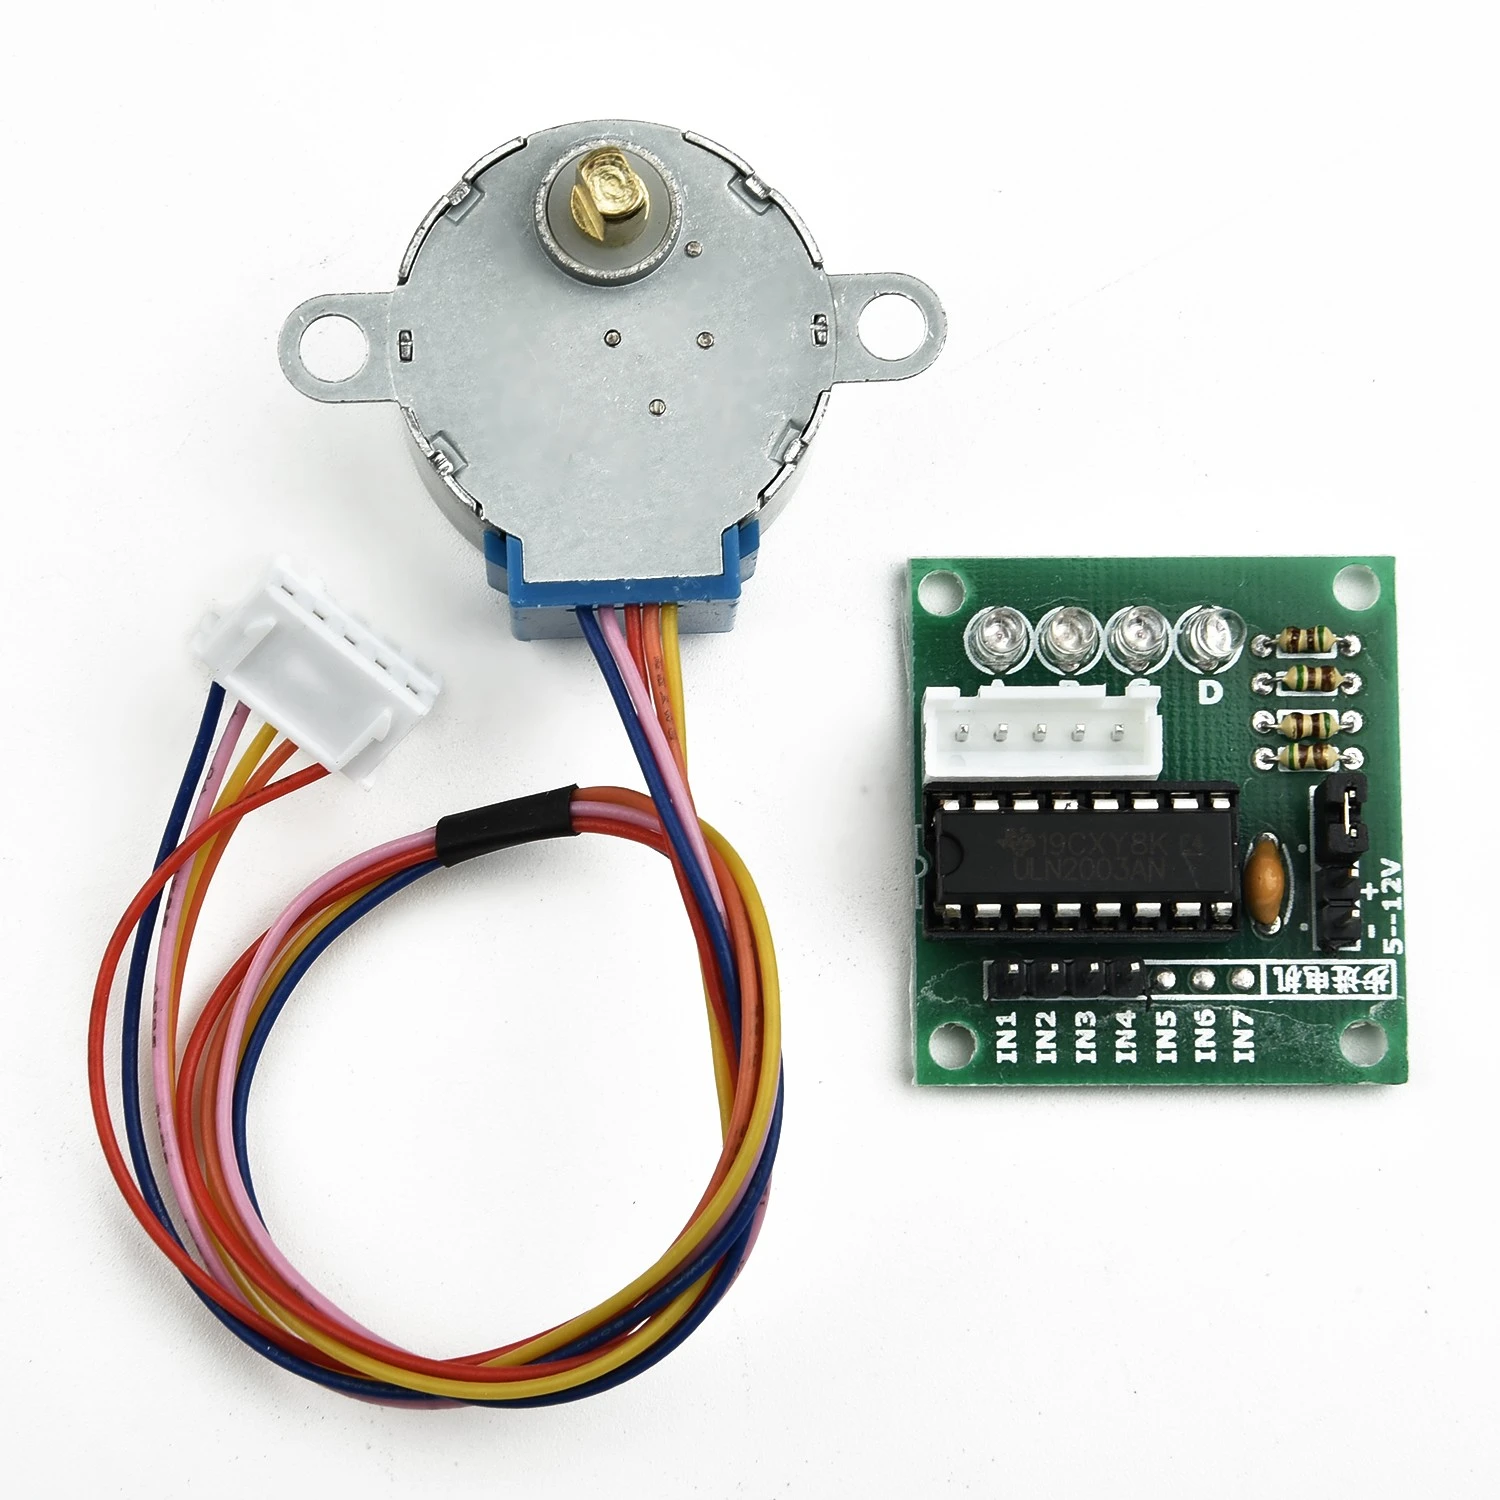 5V Stepper Motor 28BYJ-48 With Drive Test Module Board ULN2003 5 Line 4 Phase